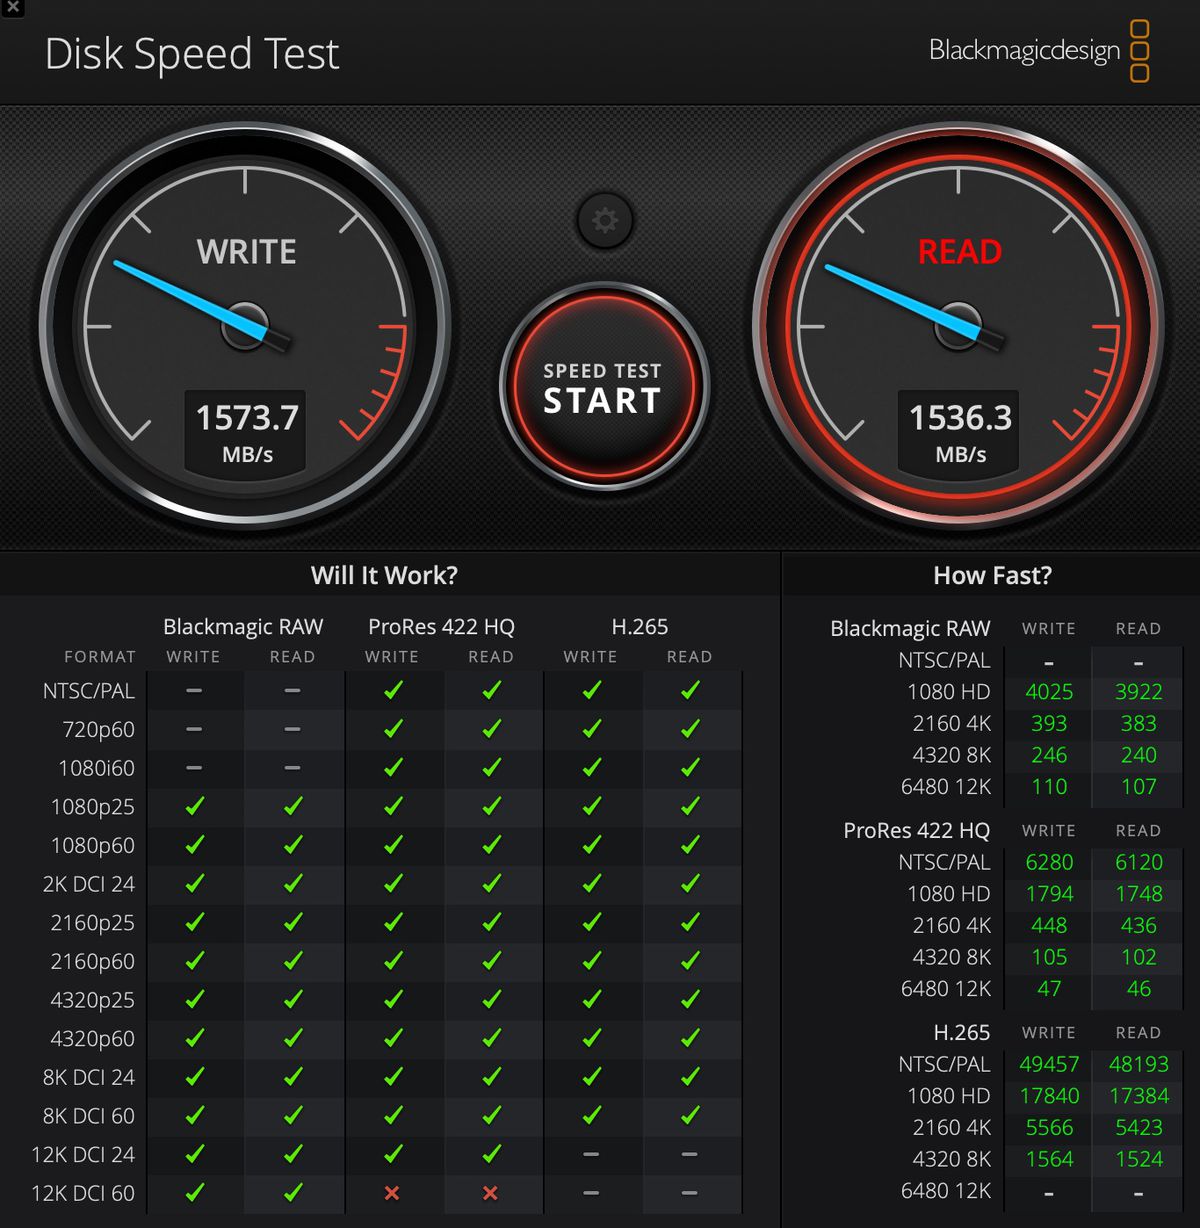 A screenshot of the Blackmagic Disk Speed ​​Test showing results of 1537.7 for Write and 1536.3 for Read.